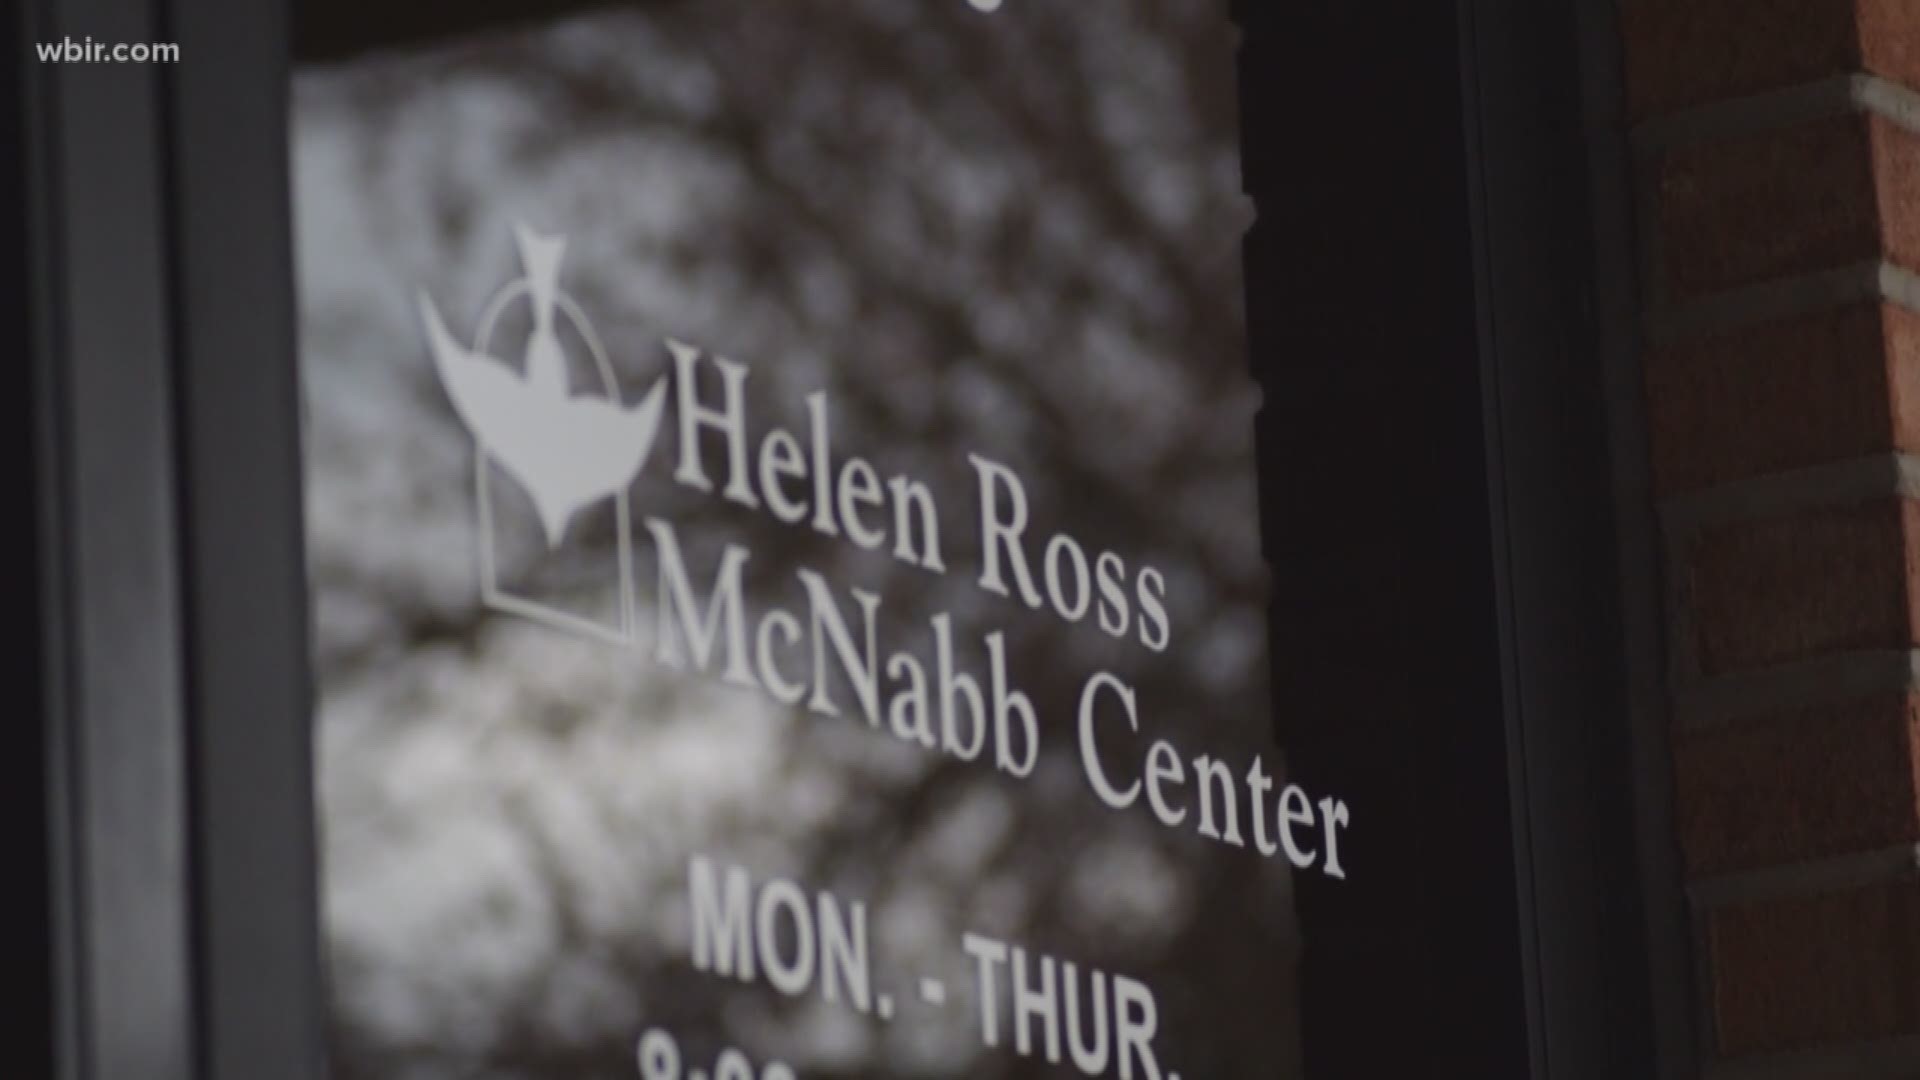 The Helen Ross McNabb Center was awarded a $1 million dollar grant to expand access to services in East Tennessee.